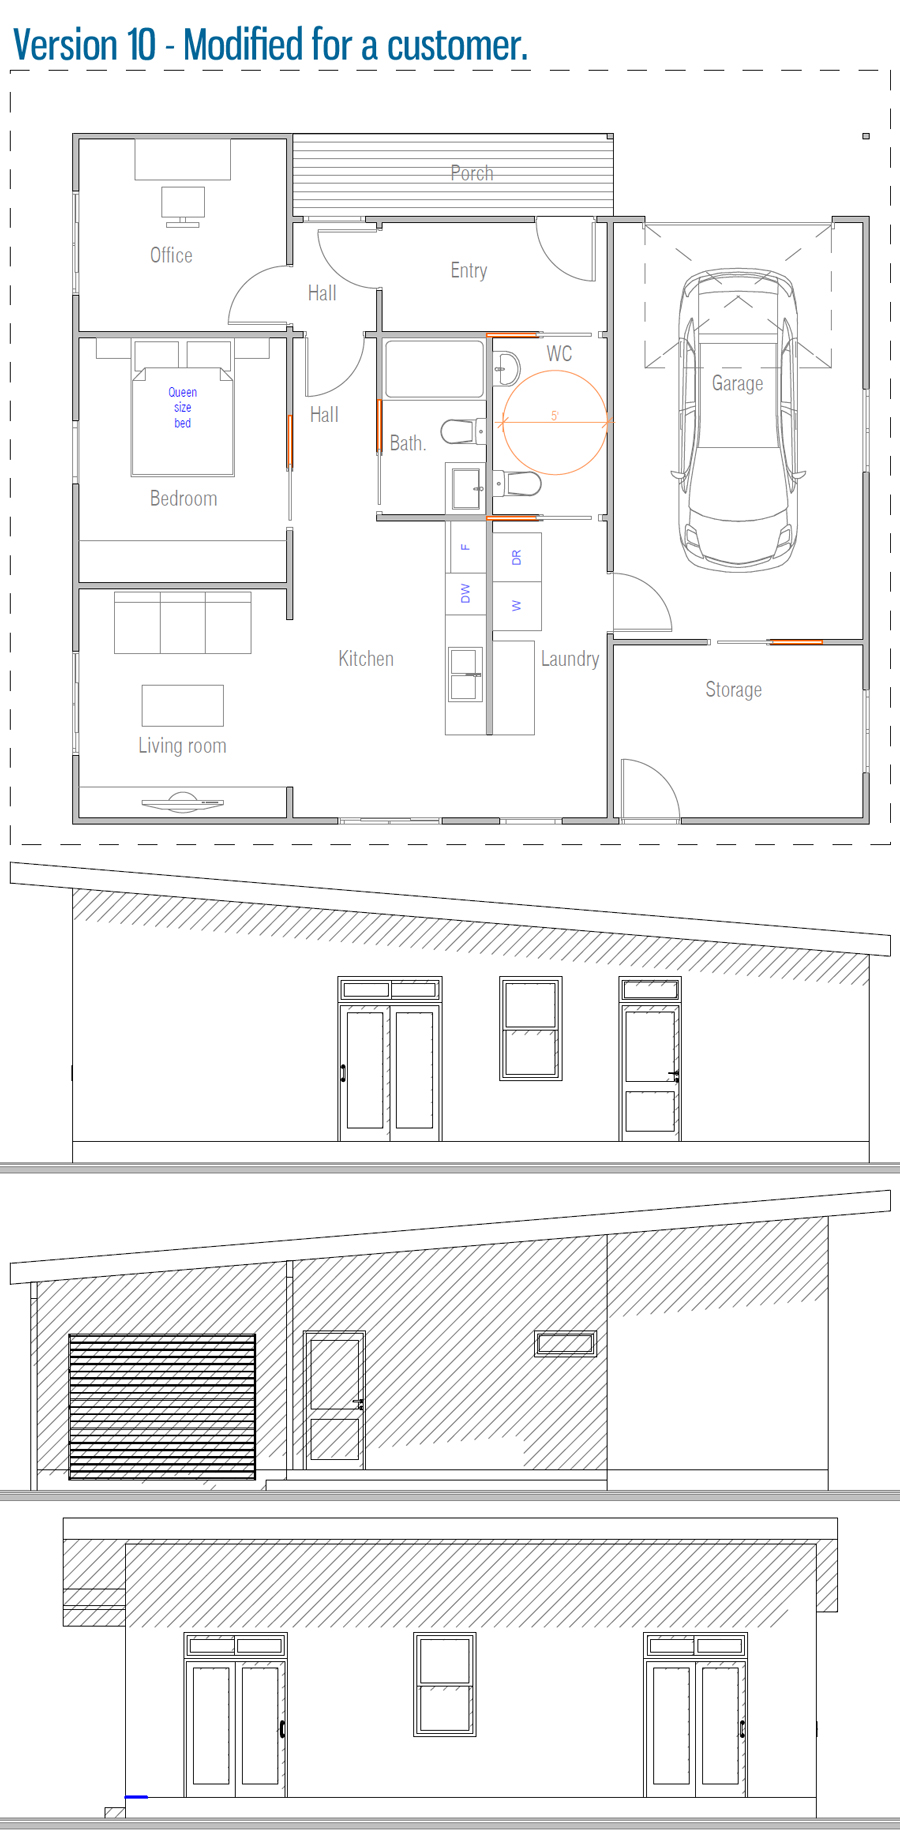 cost-to-build-less-than-100-000_50_HOUSE_PLAN_CH265_V10.jpg